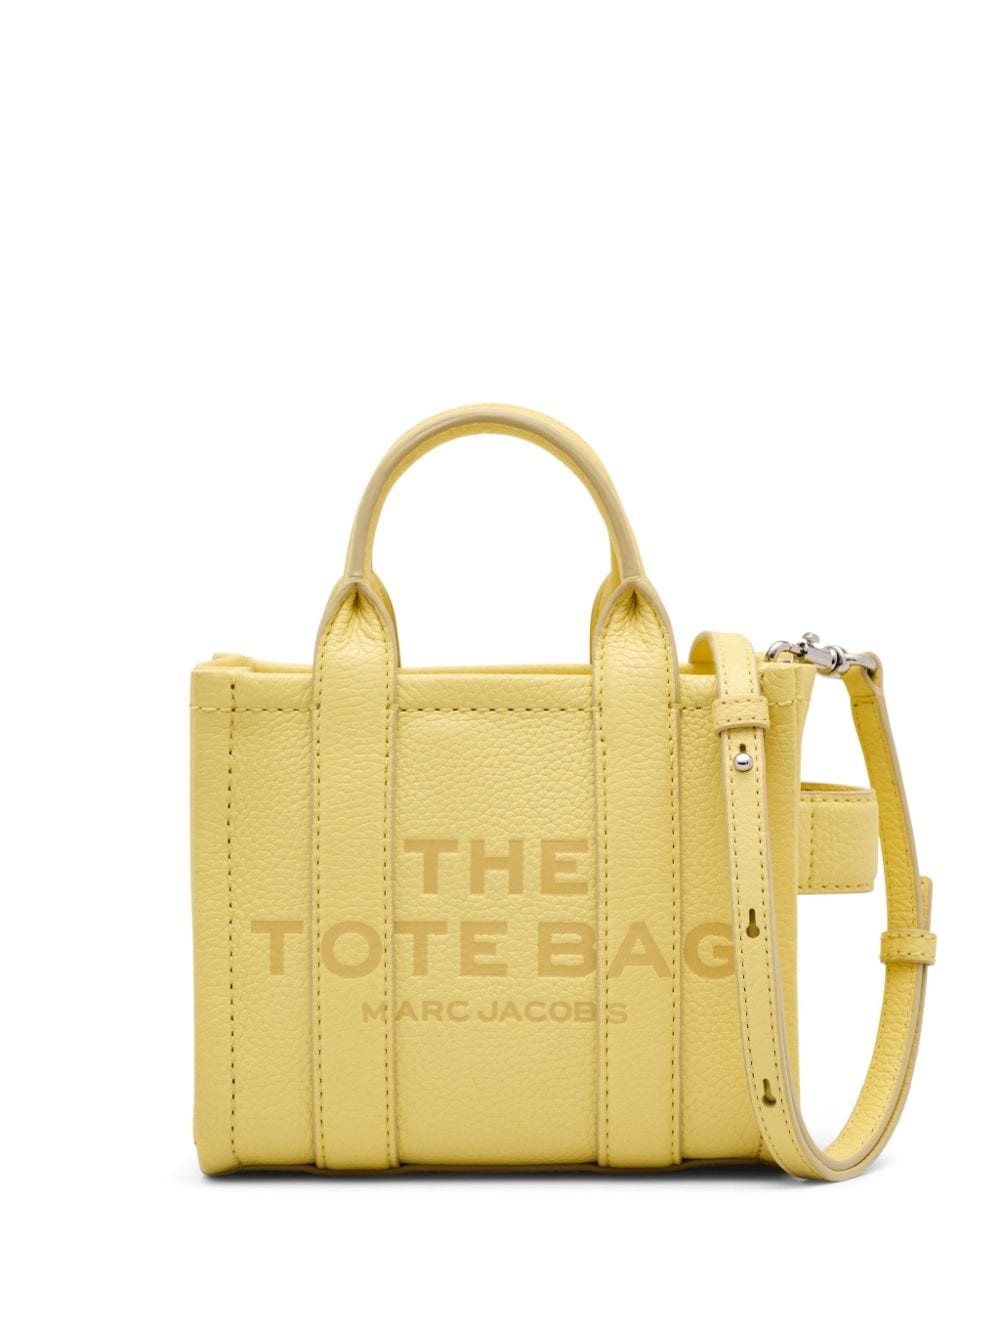 Marc Jacobs The Leather Crossbody Tote bag - Yellow von Marc Jacobs